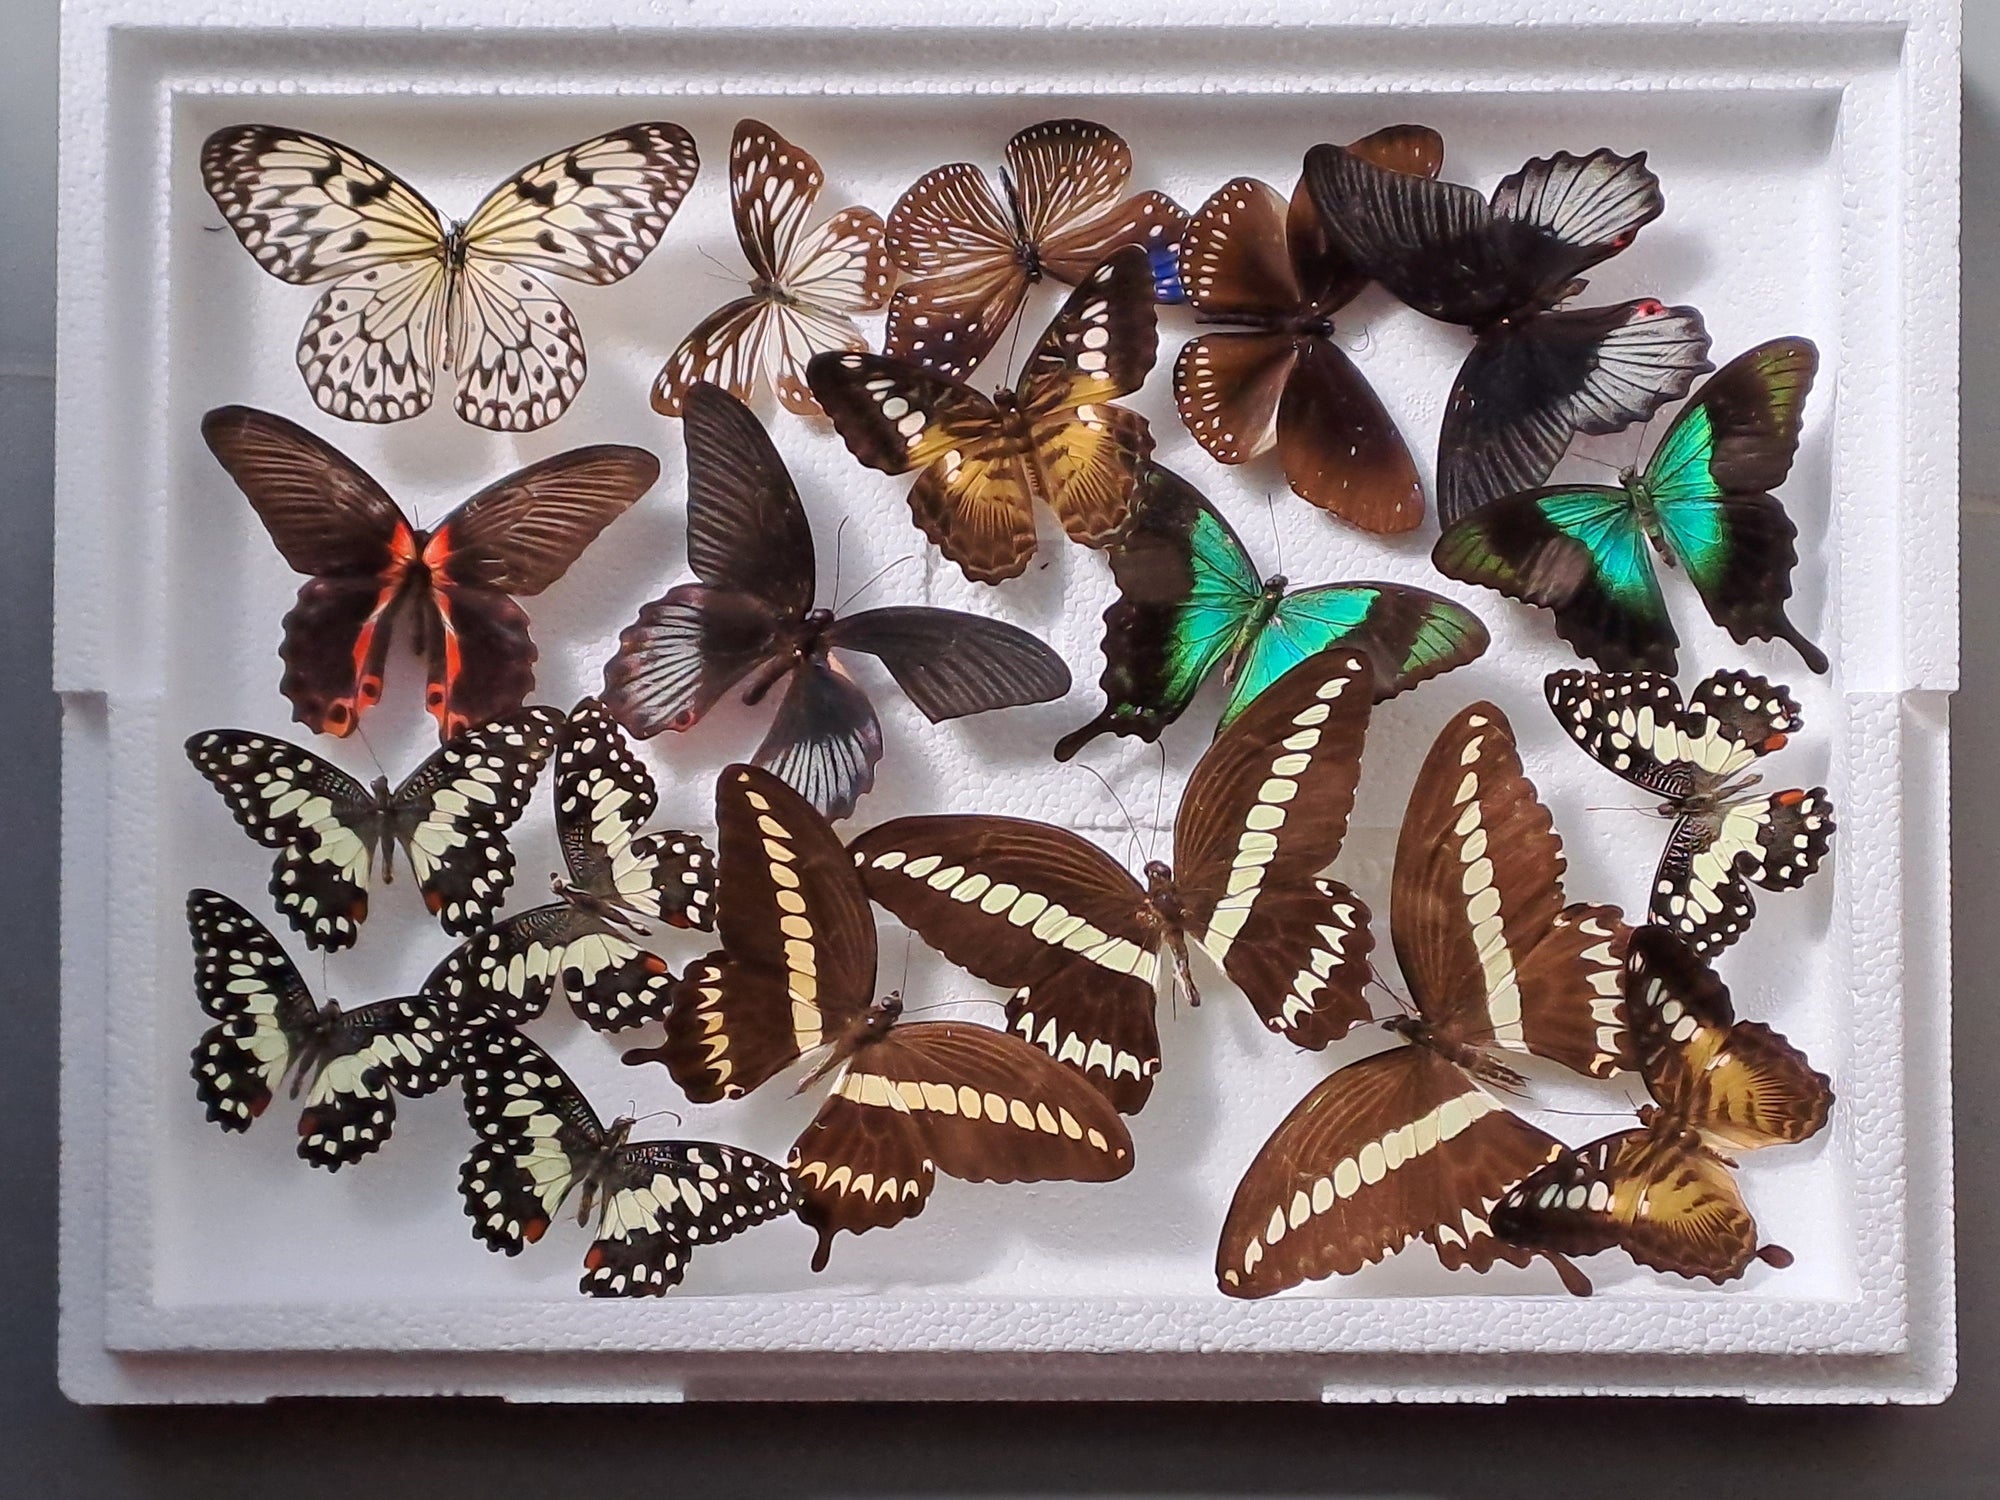 DAMAGED BUTTERFLIES as seen in photo. Broken specimens good for art and craft projects (BOX No. 8)